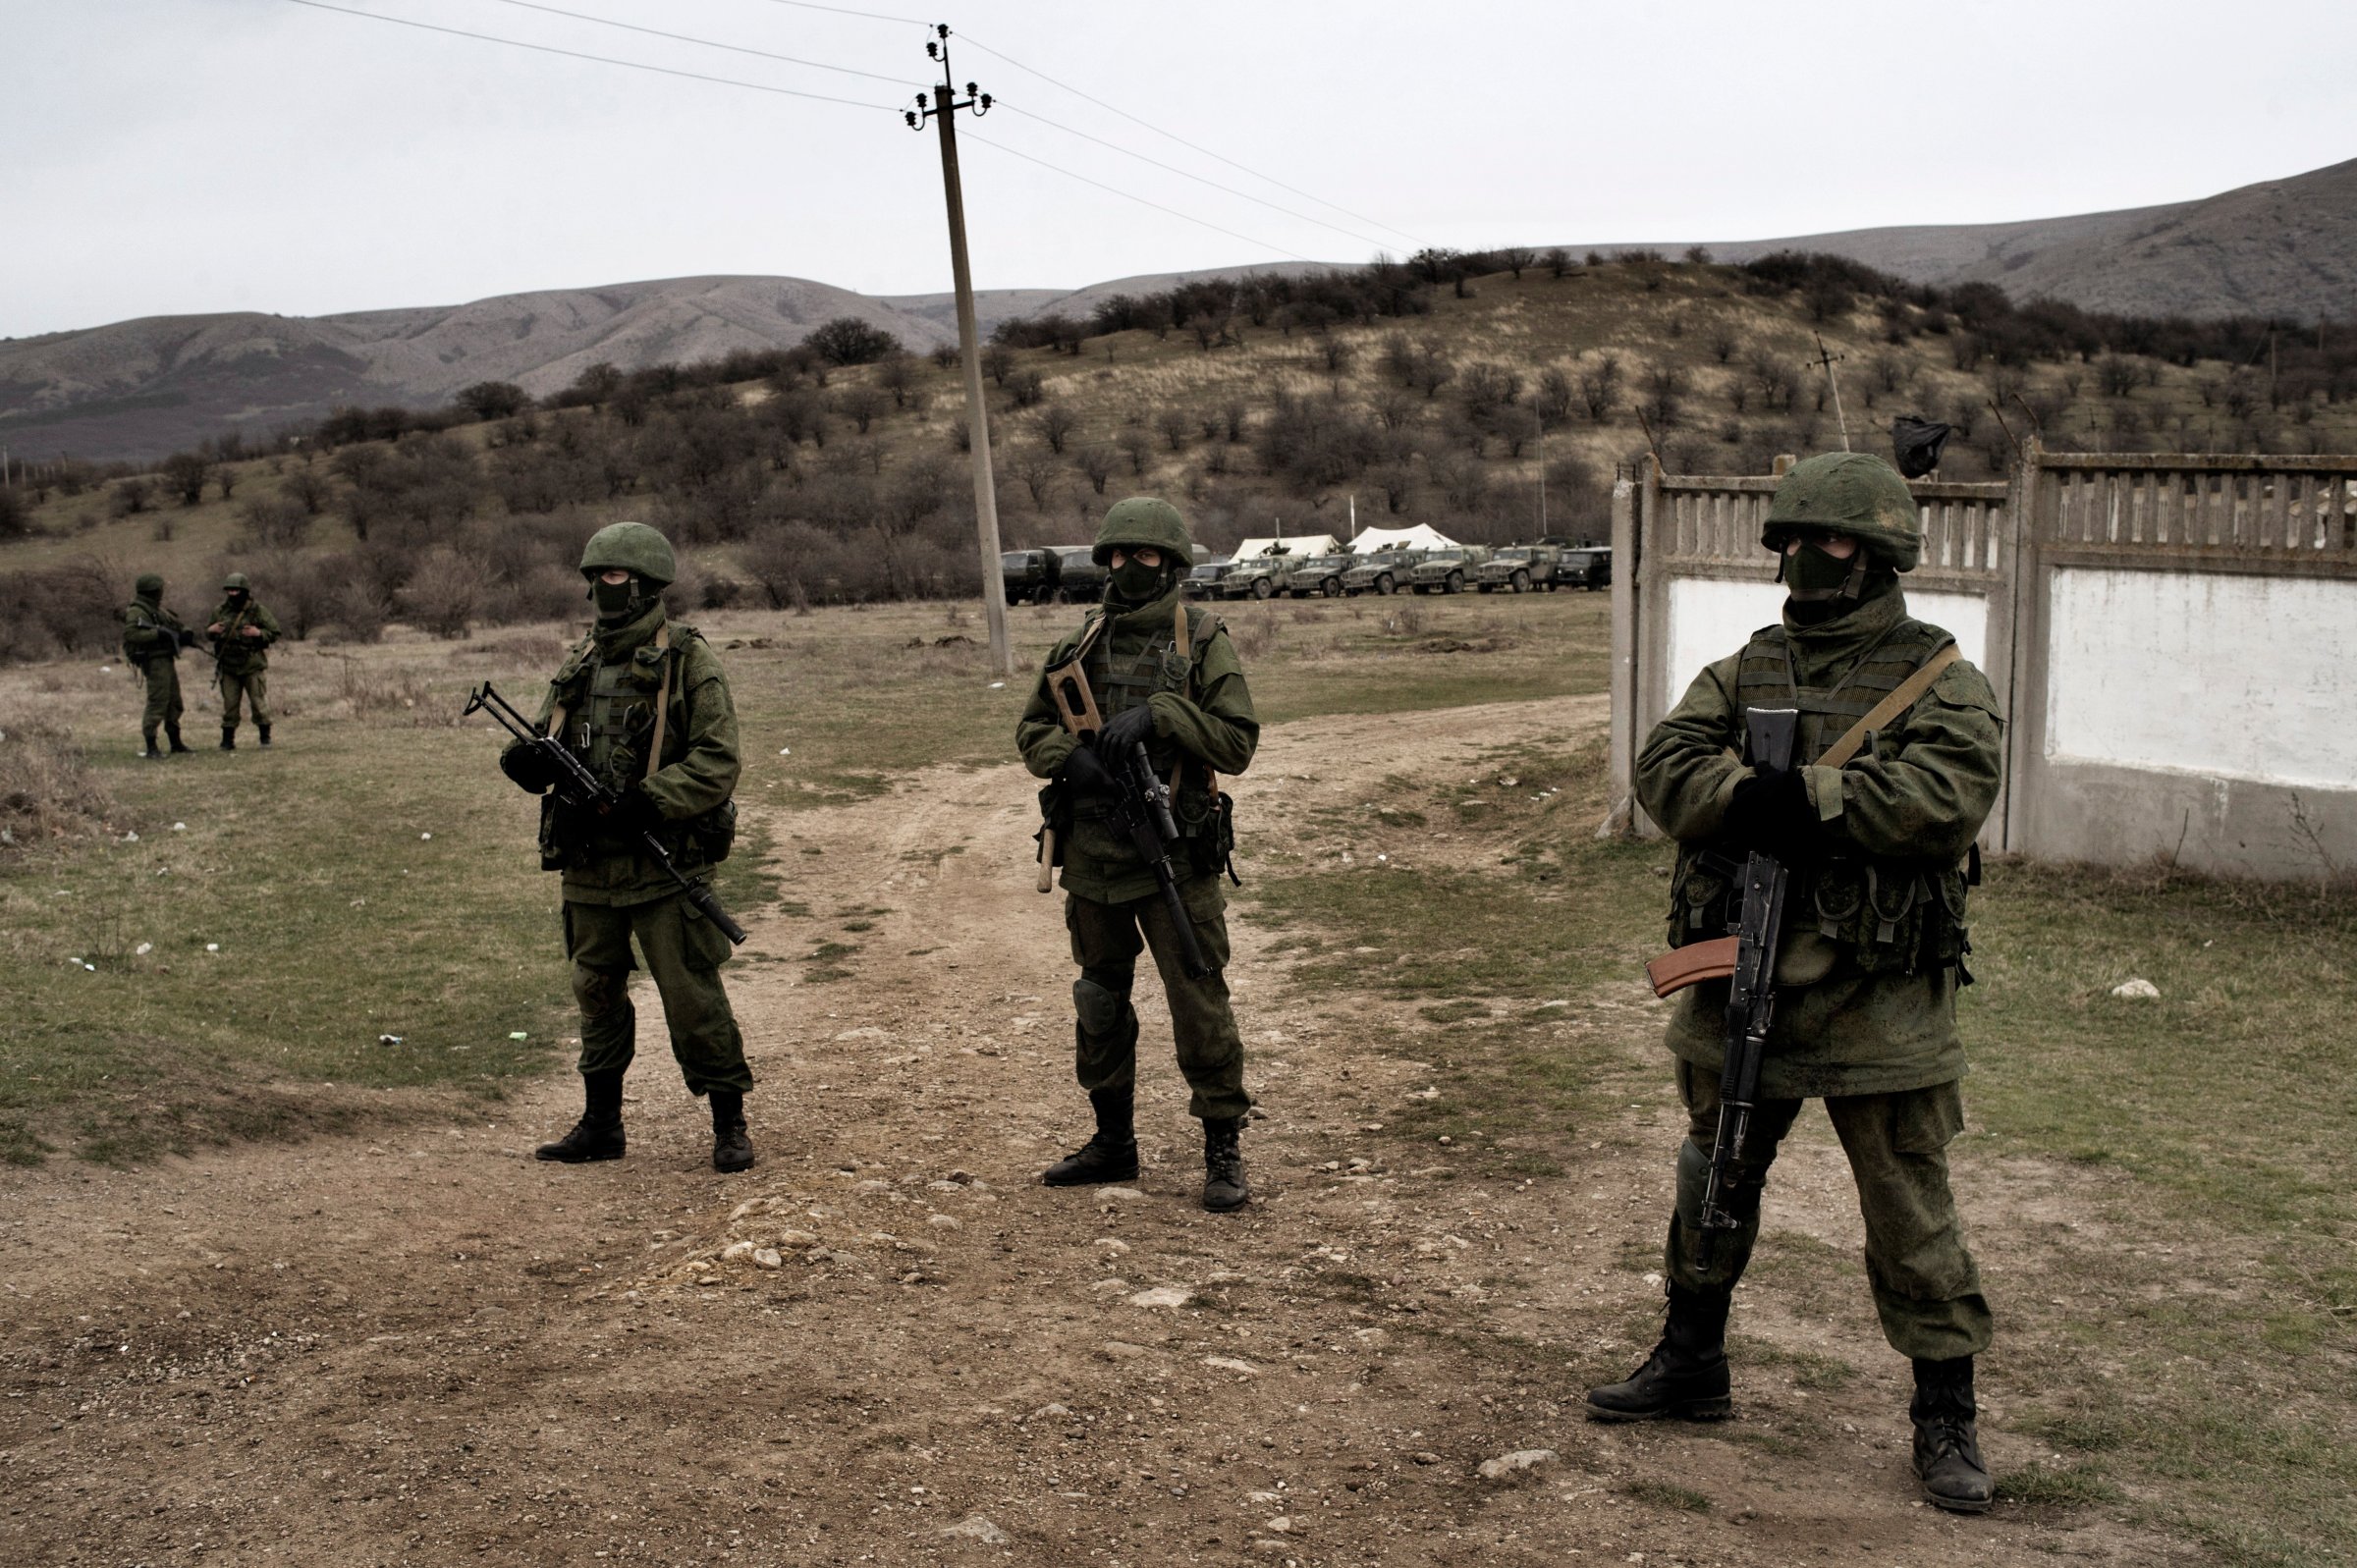 Some heavily armed soldiers without insignia had taken up positions around small Ukrainian military bases, but did not try to enter them, in Perevalnoye, Ukraine on March, 4 2014.